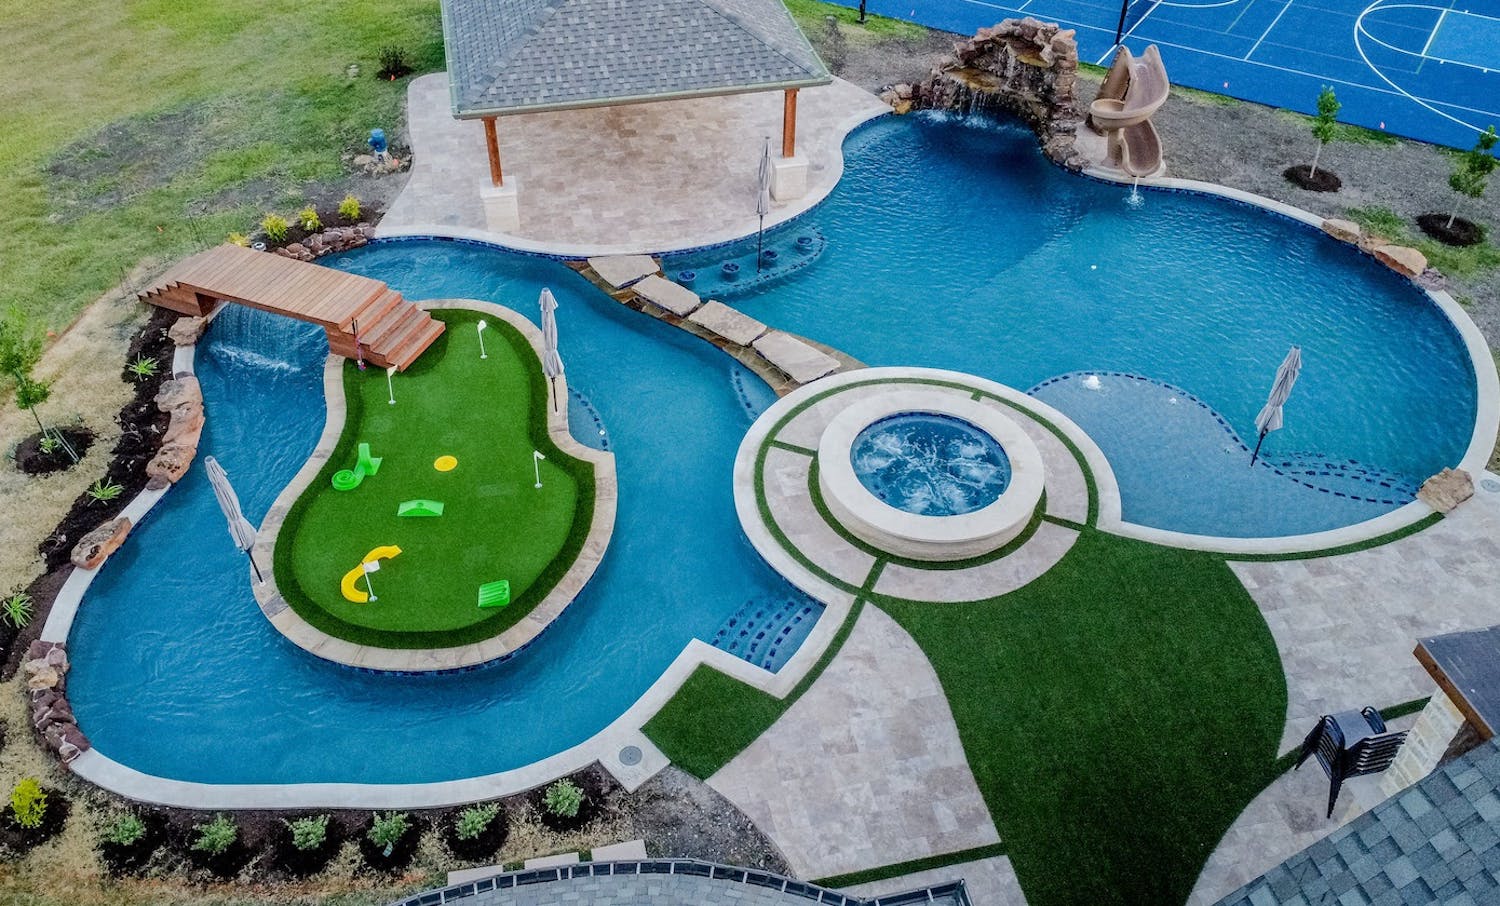 A pool, hot tub, lazy river and putting green.